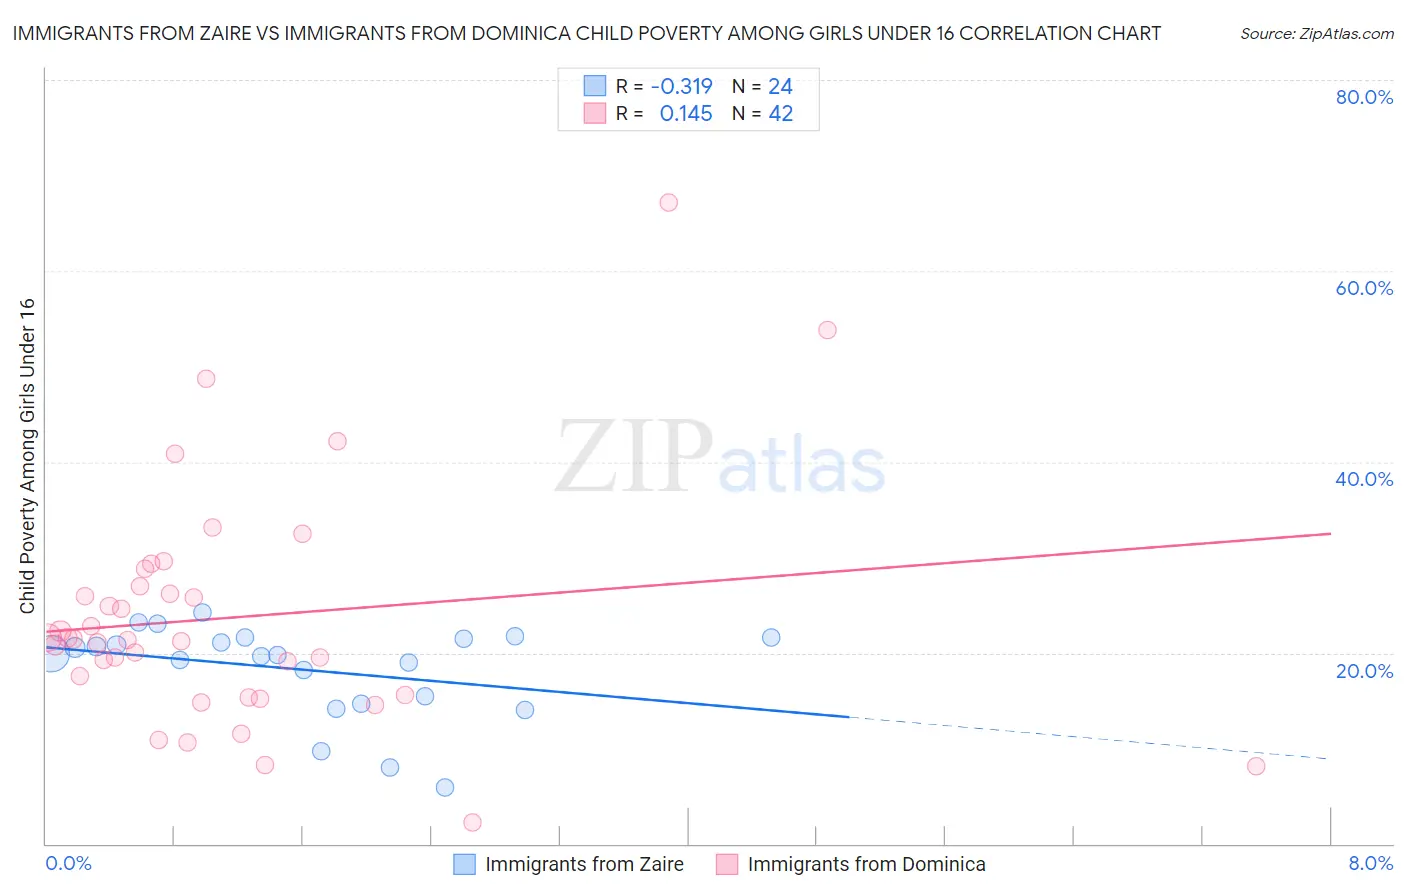 Immigrants from Zaire vs Immigrants from Dominica Child Poverty Among Girls Under 16